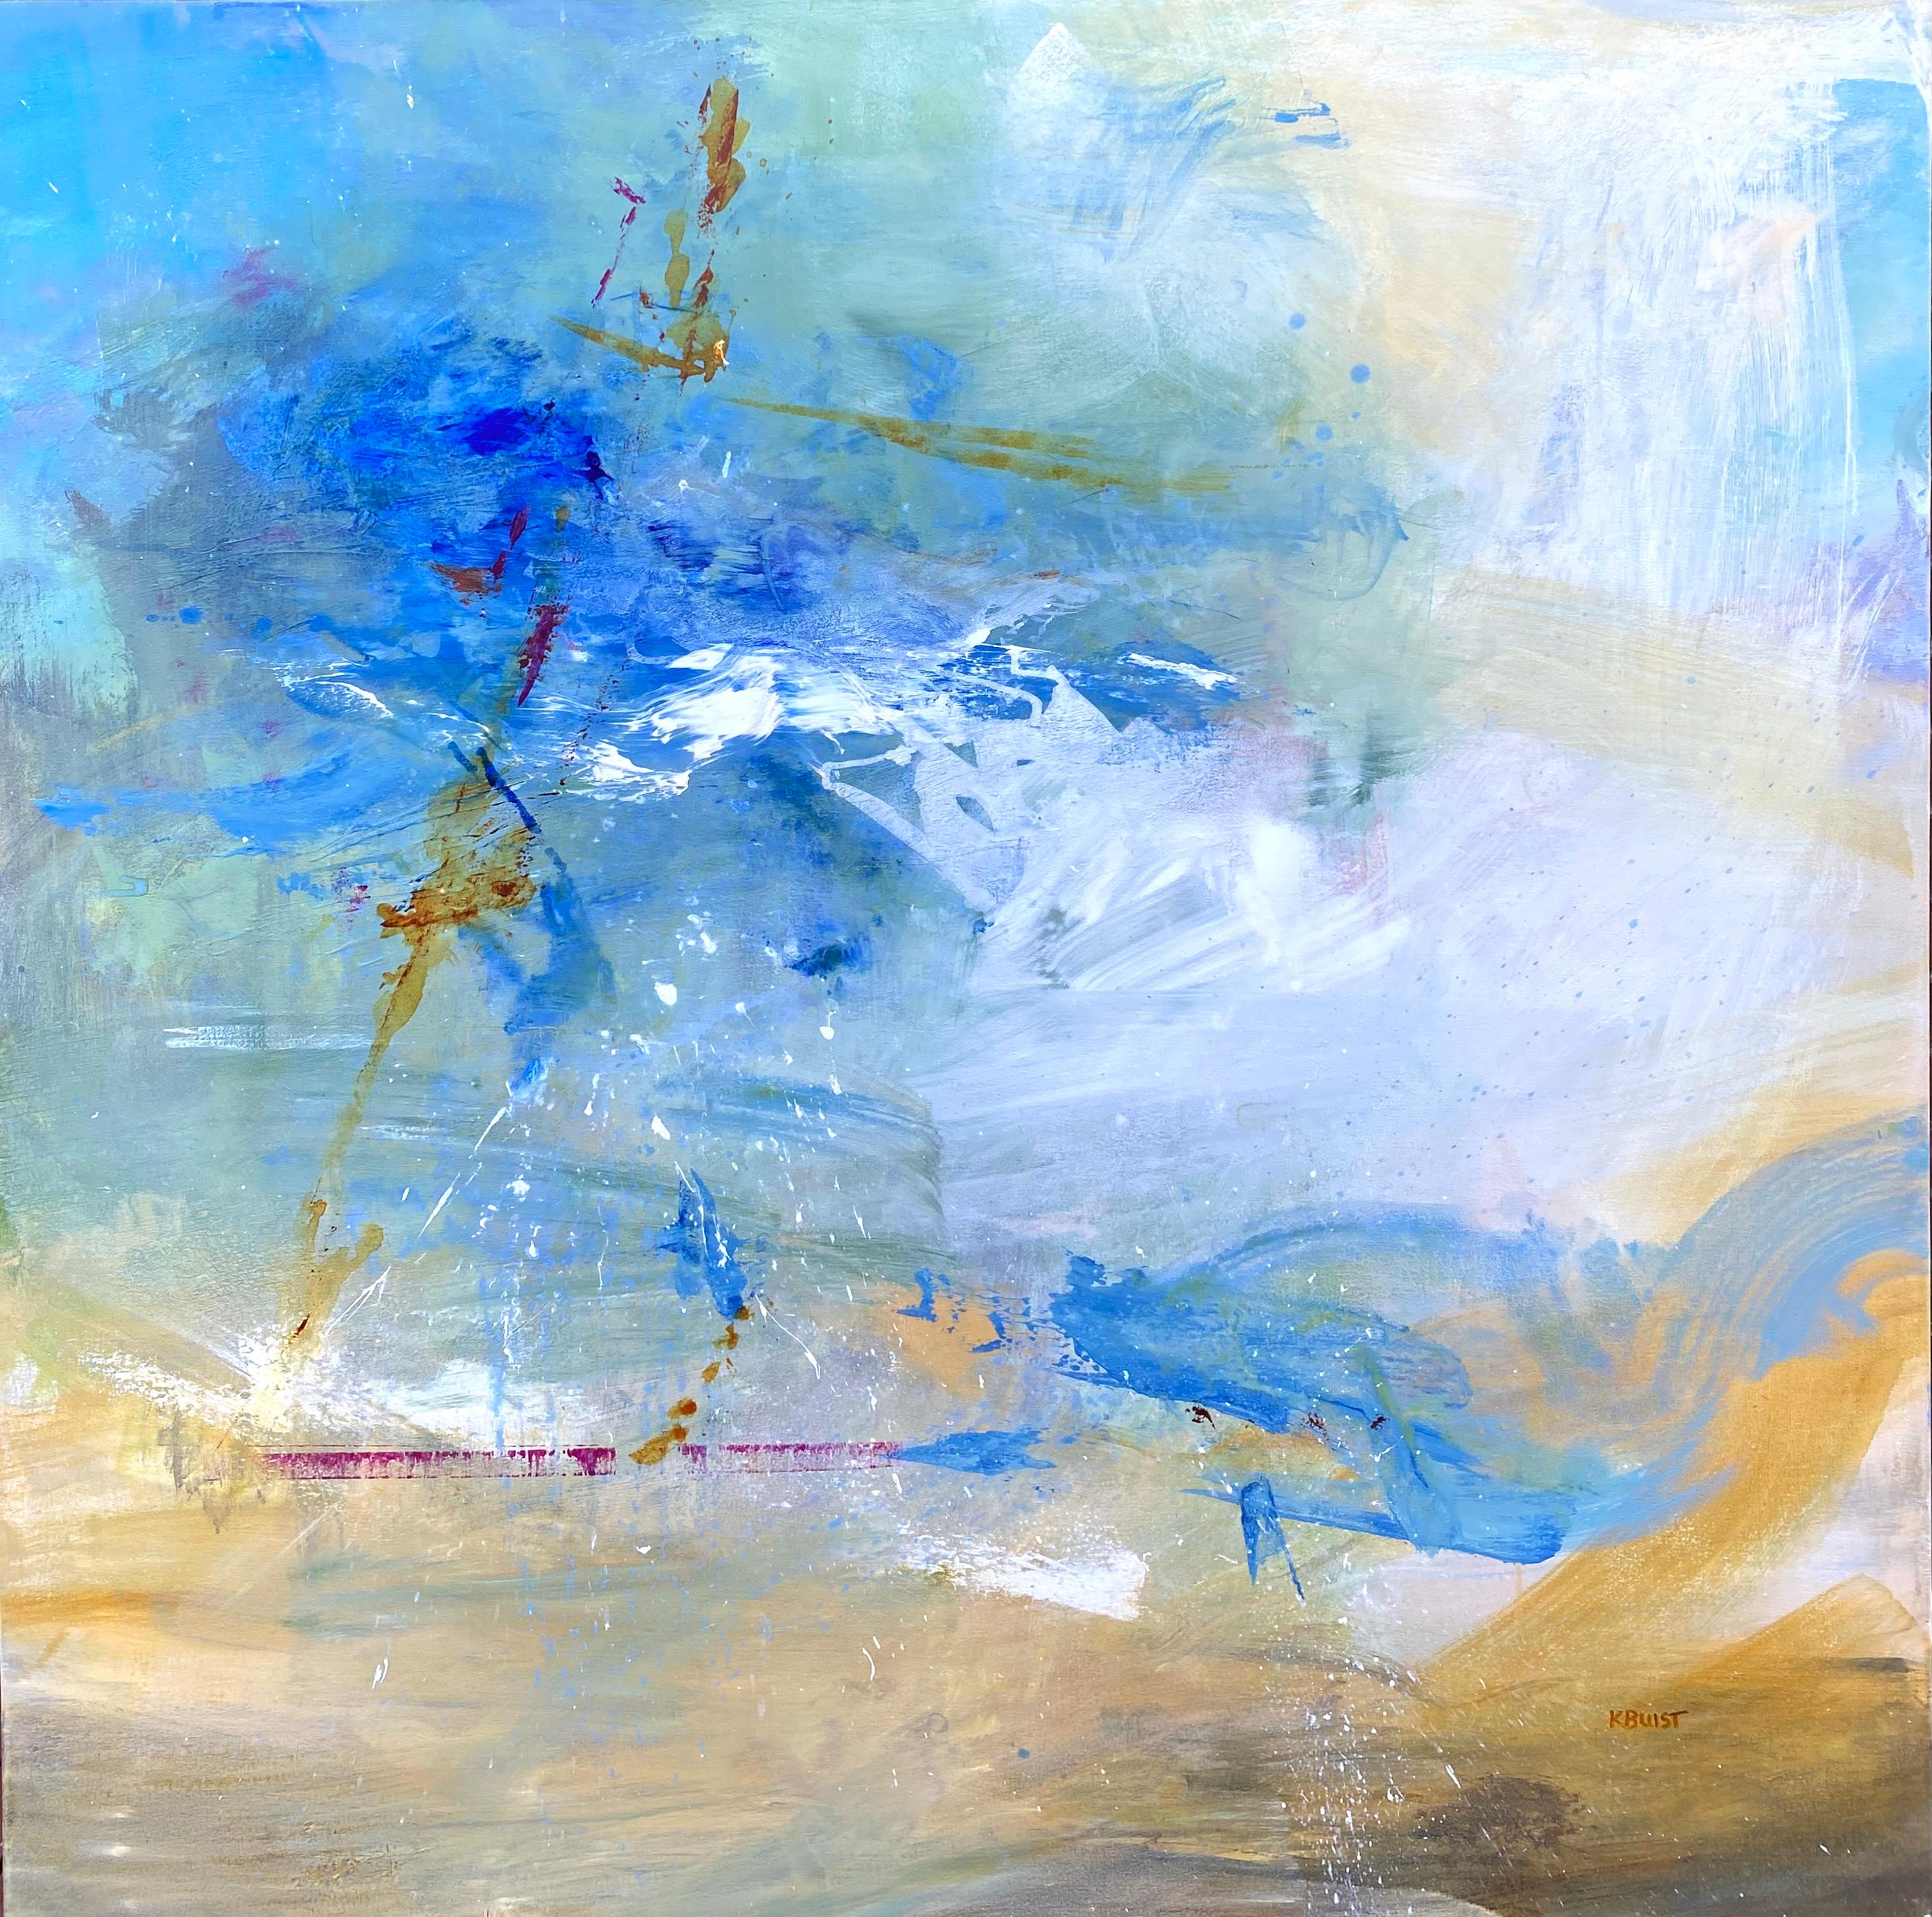 Kathy Buist Abstract Painting - “Dreams 5”